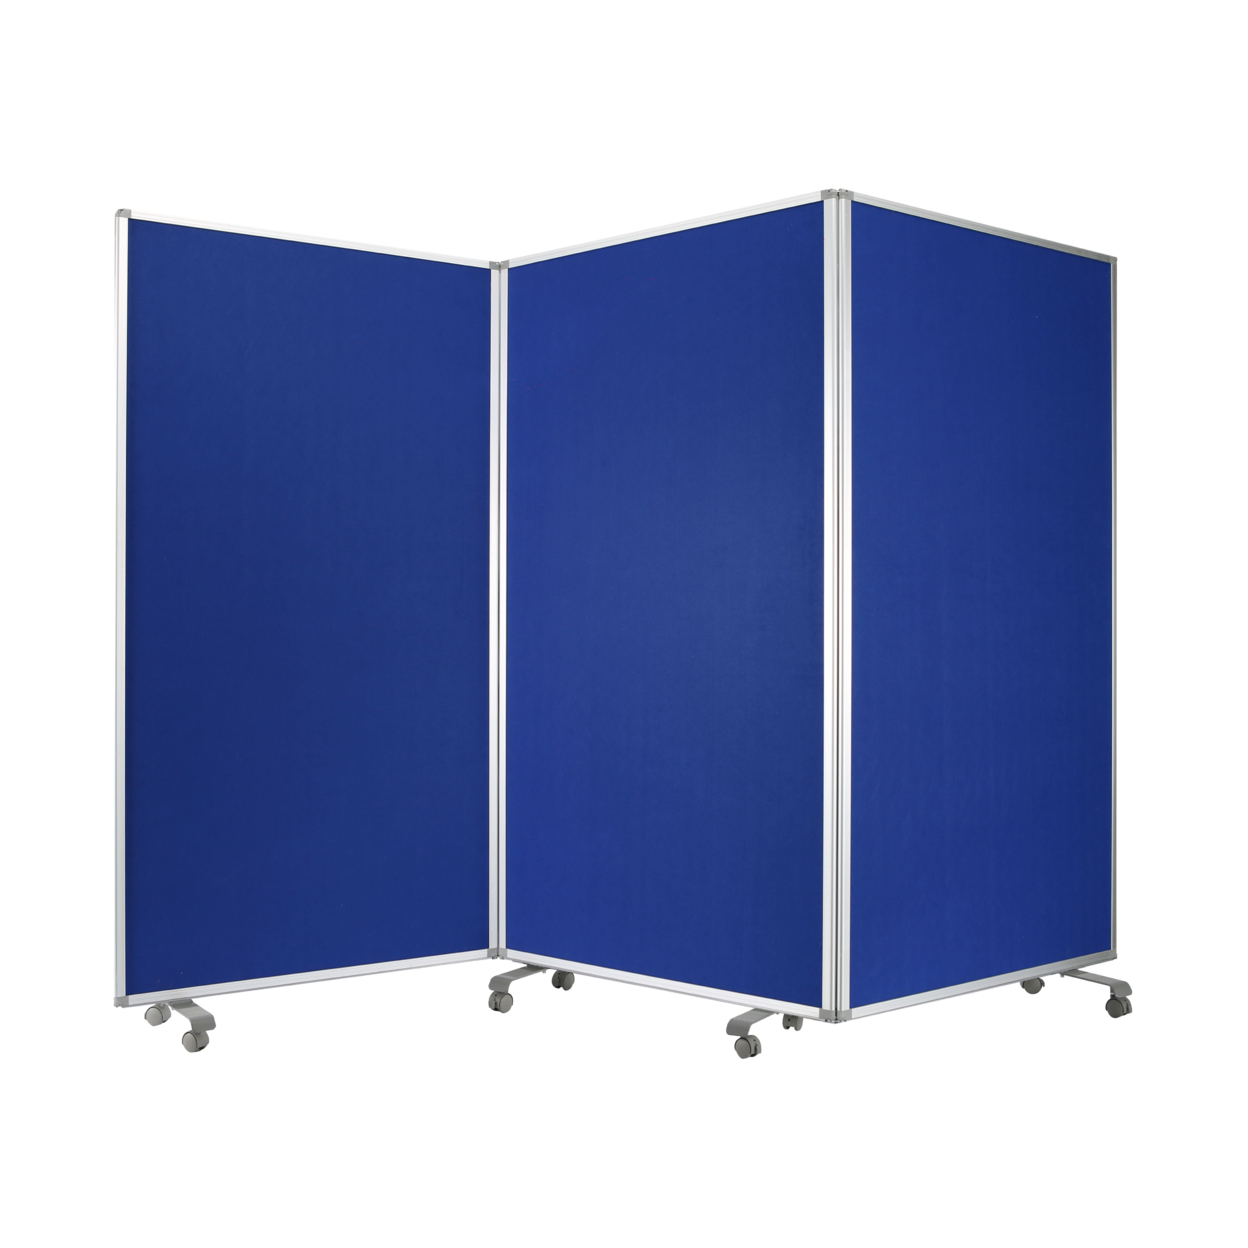 Accordion Style Fabric Upholstered 3 Panel Room Divider, Blue And Gray- Saltoro Sherpi